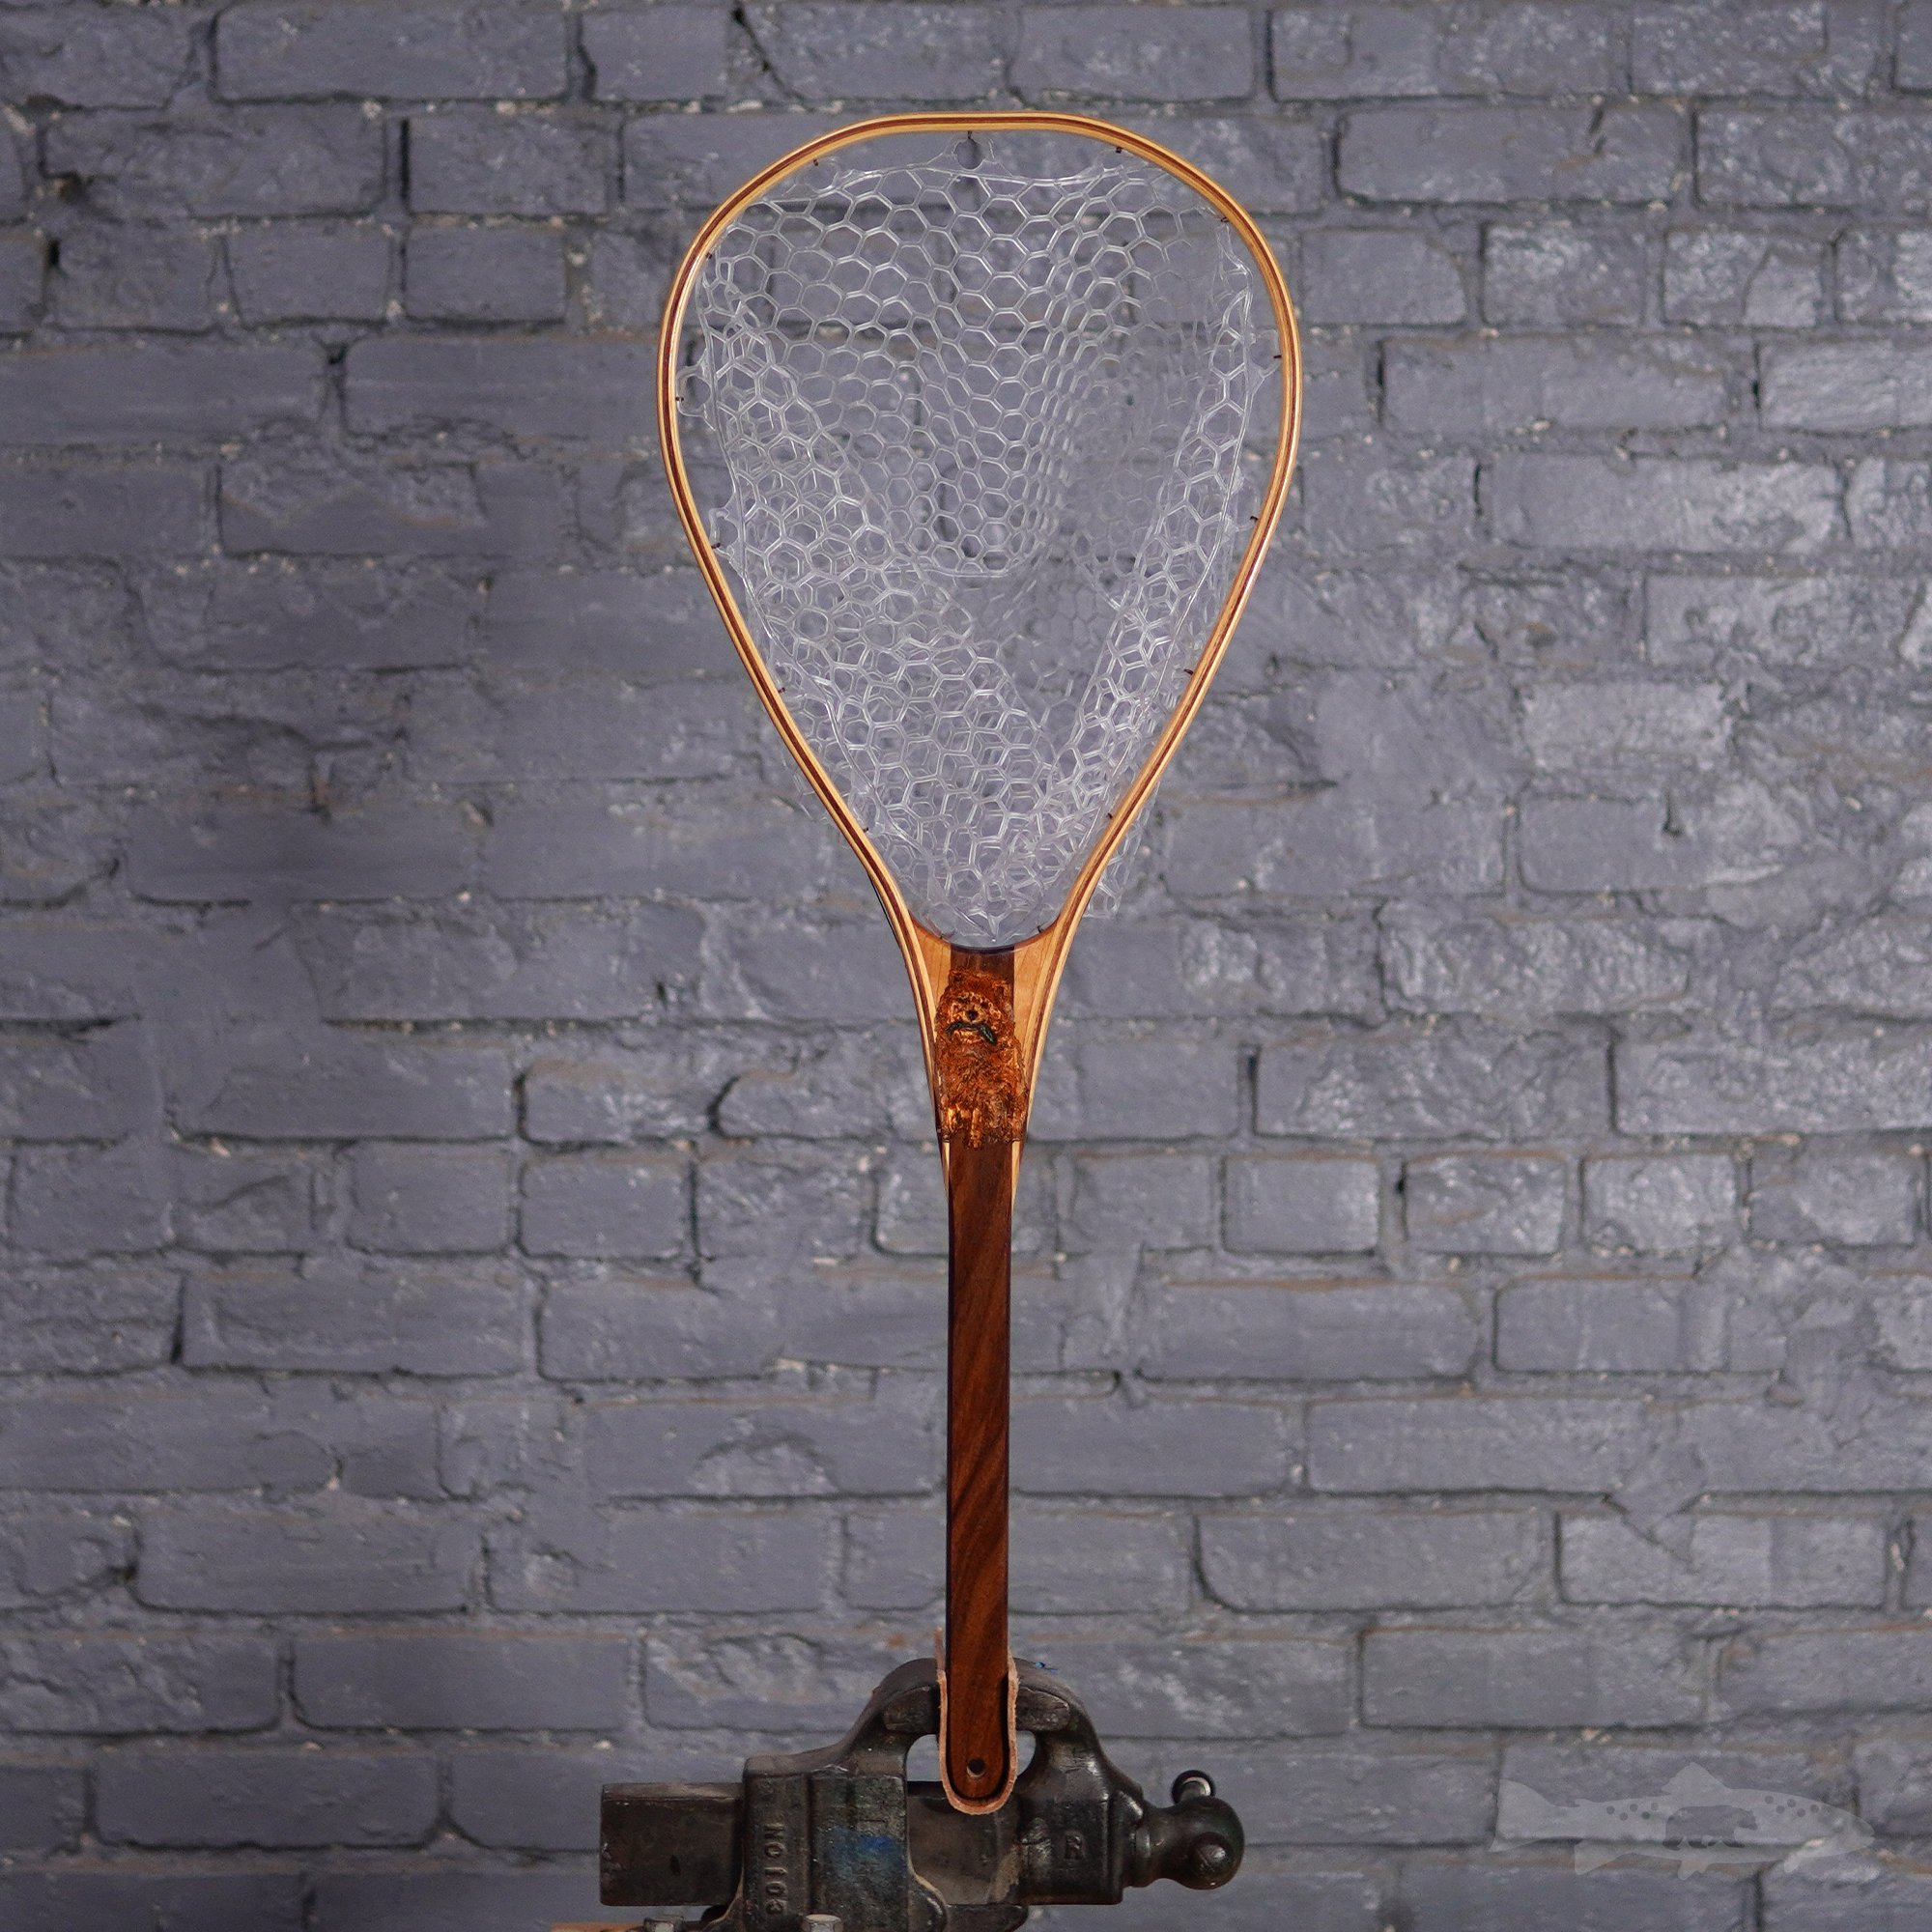 Steal Your Fish Engraved Handcrafted Landing Net - Made in Pennsylvania  Wood Fly Fishing net - Handcrafted Custom Fly Fishing net made in the USA